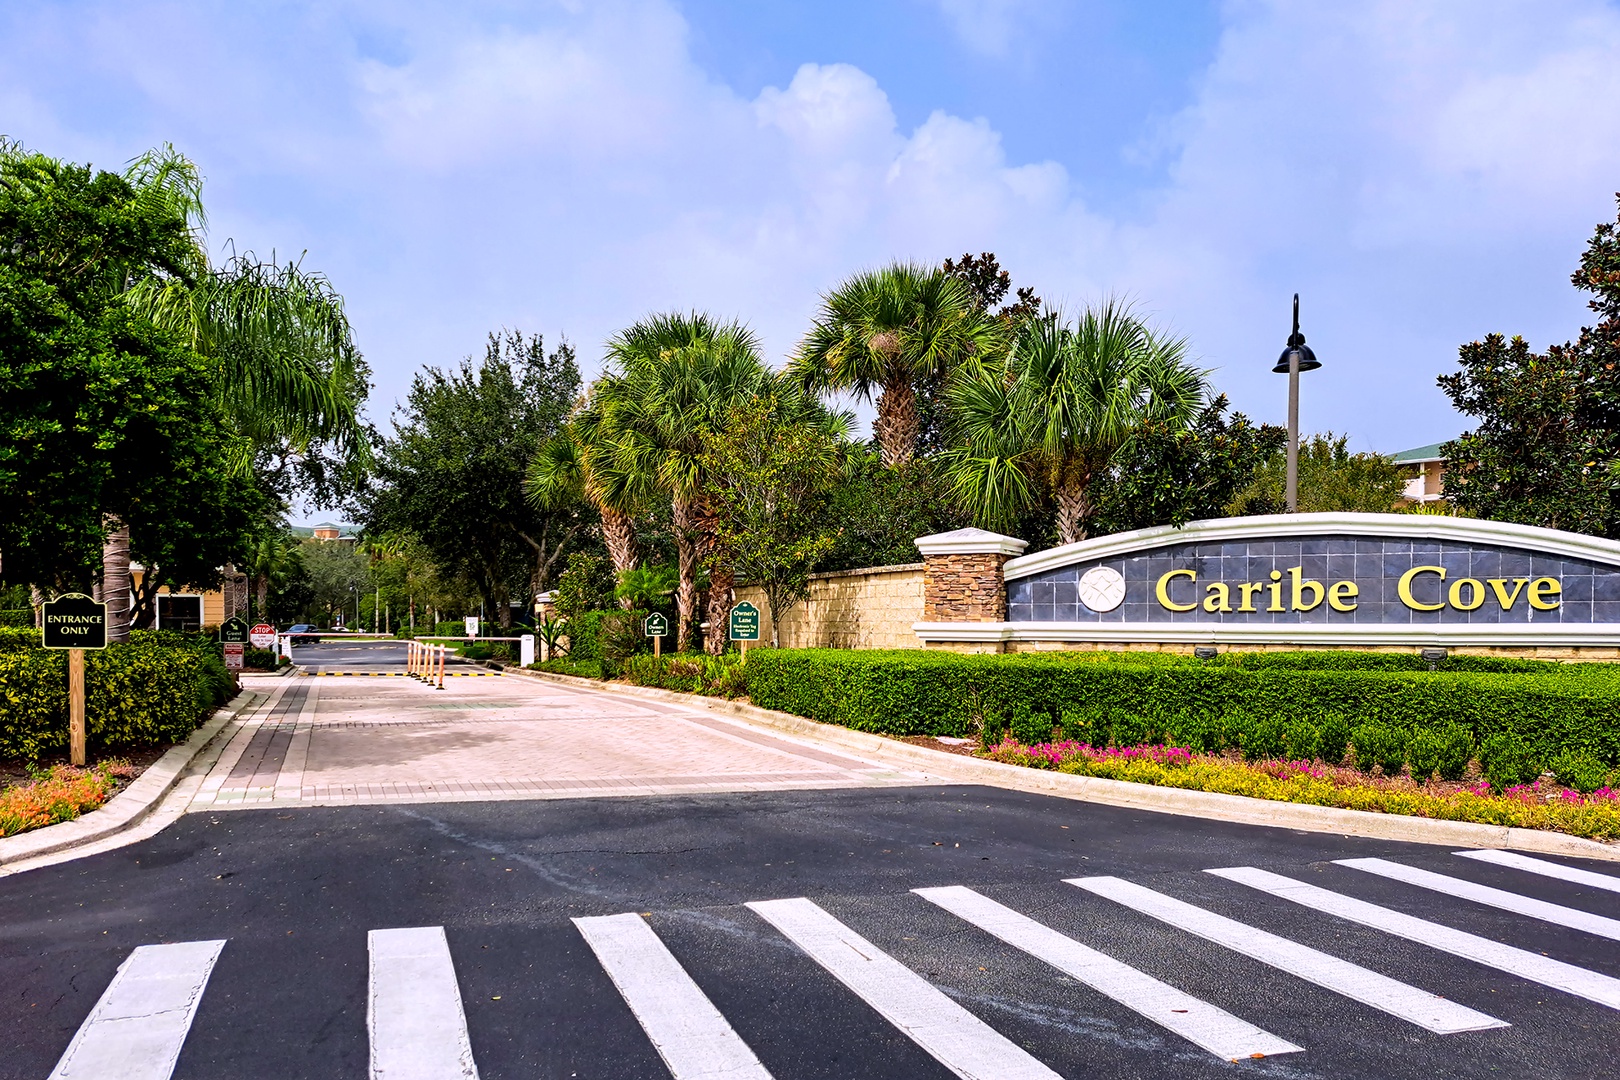 Enjoy your stay at the gorgeous Caribe Cove resort!